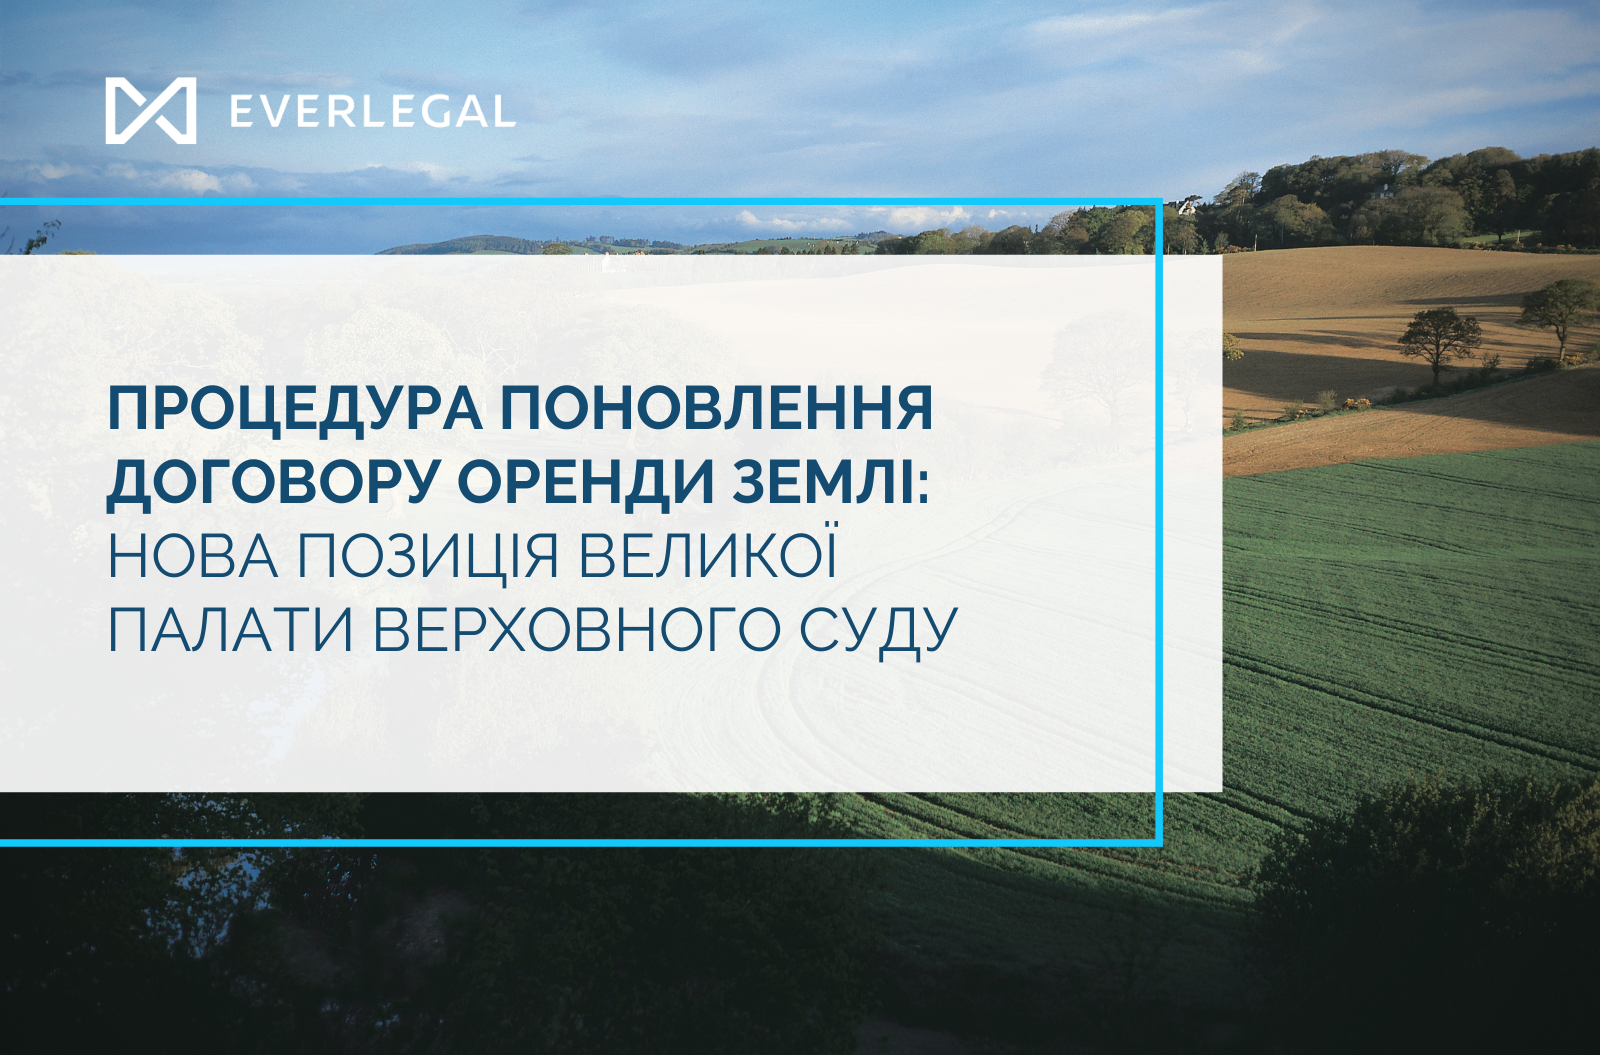 Land lease renewal procedure: a new position of the Grand Chamber of the Supreme Court